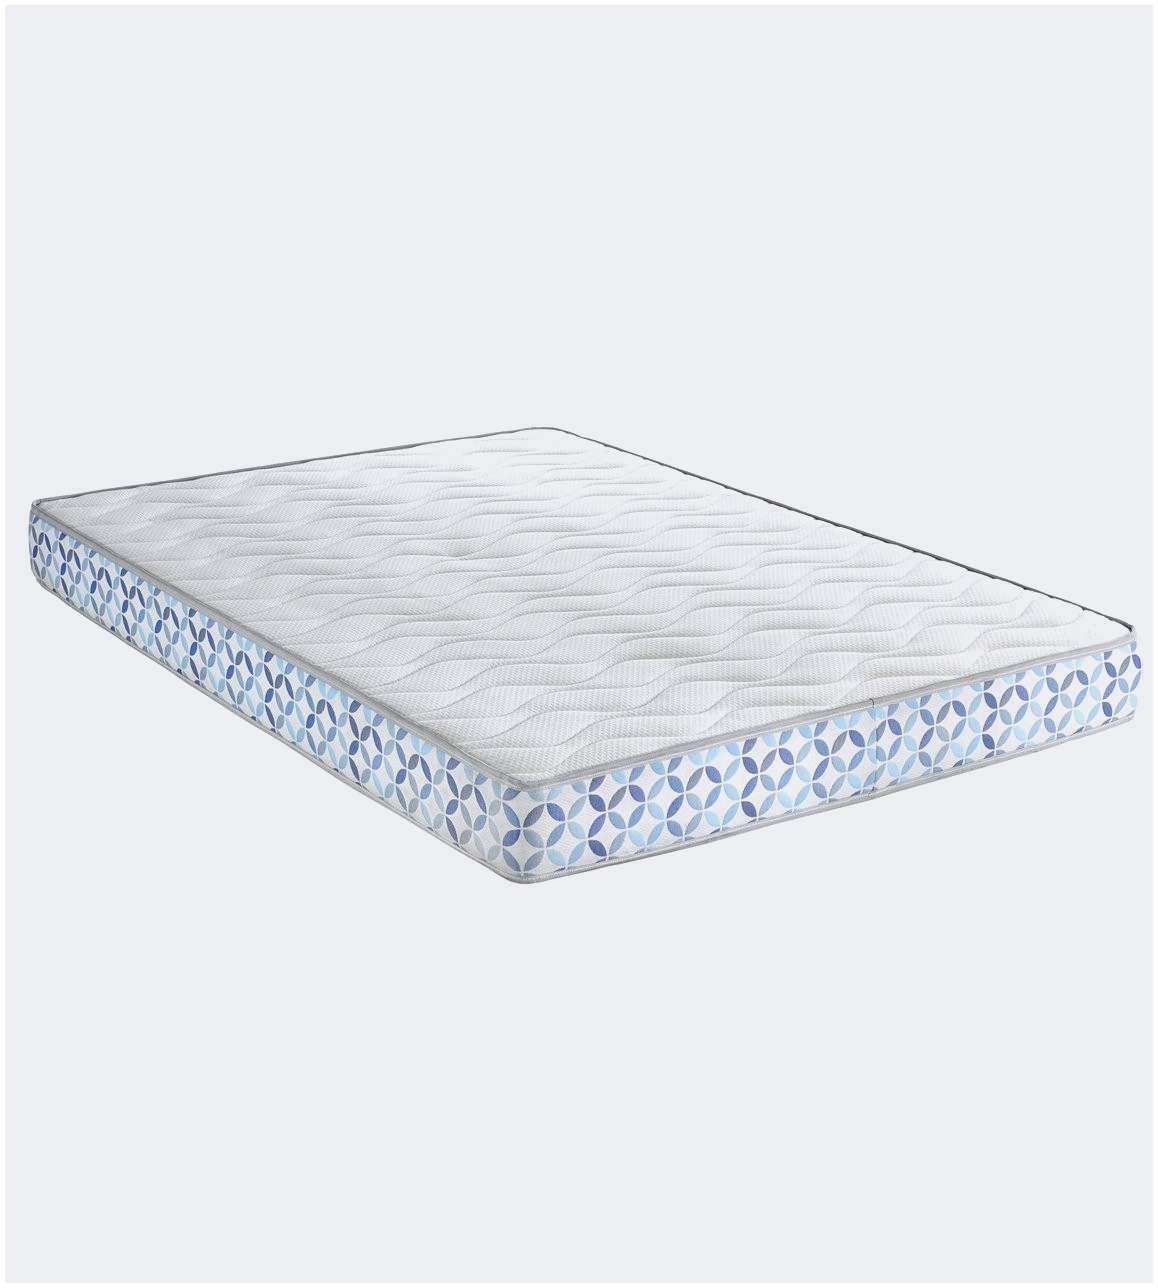 Lit Pas Cher 140×190 Le Luxe Luxe sommier but 140—190 Beau S Matelas but 140—190 Luxe Conforama